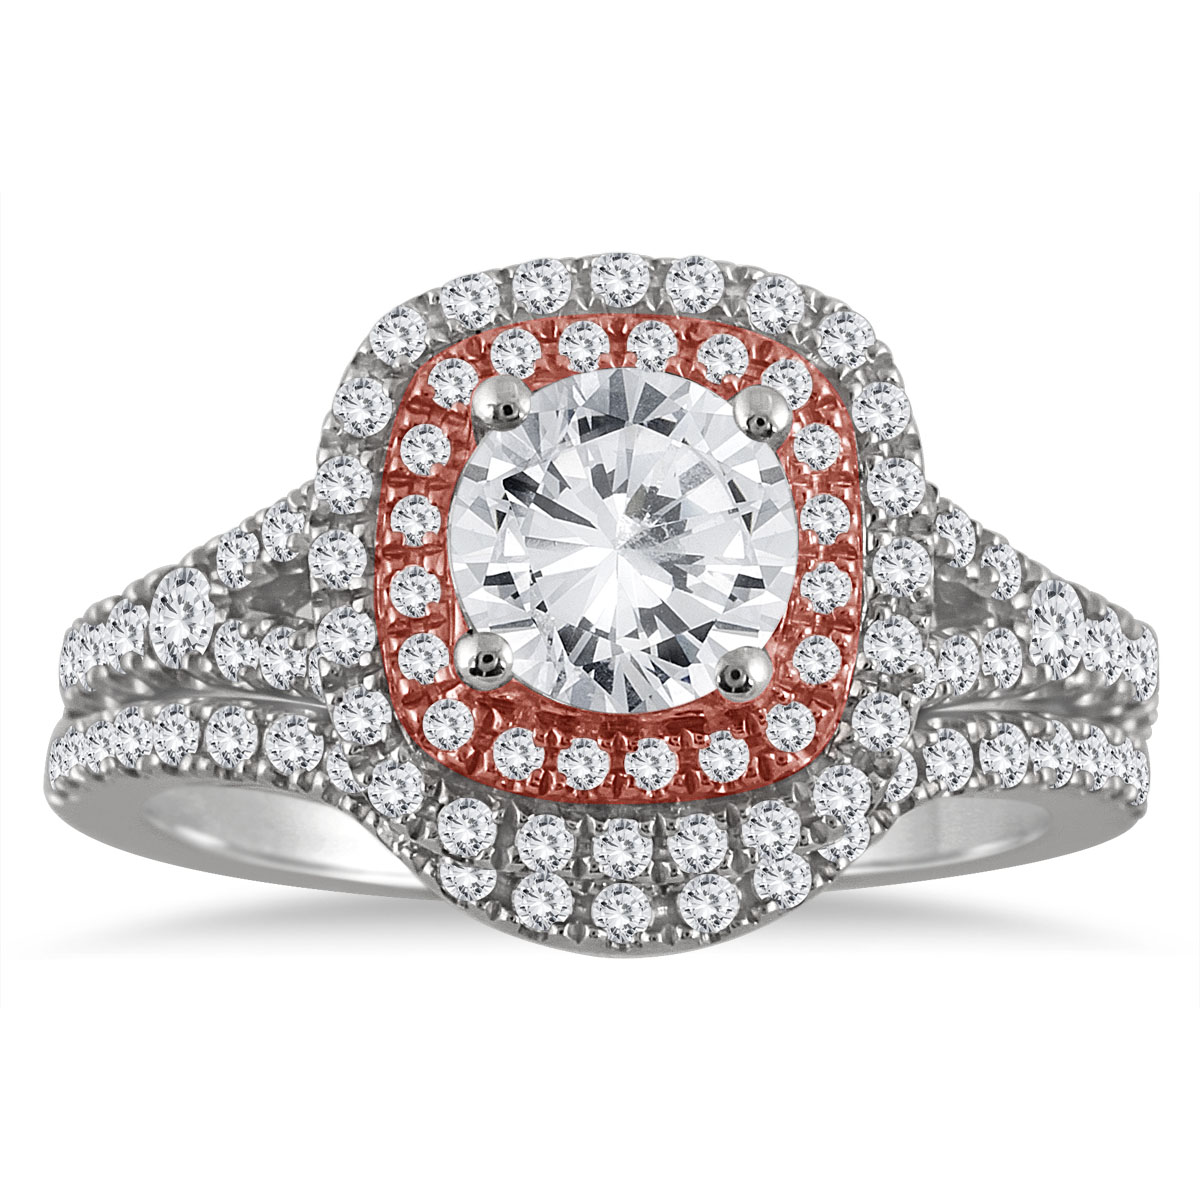 Image of AGS Certified 1 5/8 Carat TW Diamond Bridal Set in 14K Rose and White Gold (I-J Color I2-I3 Clarity)